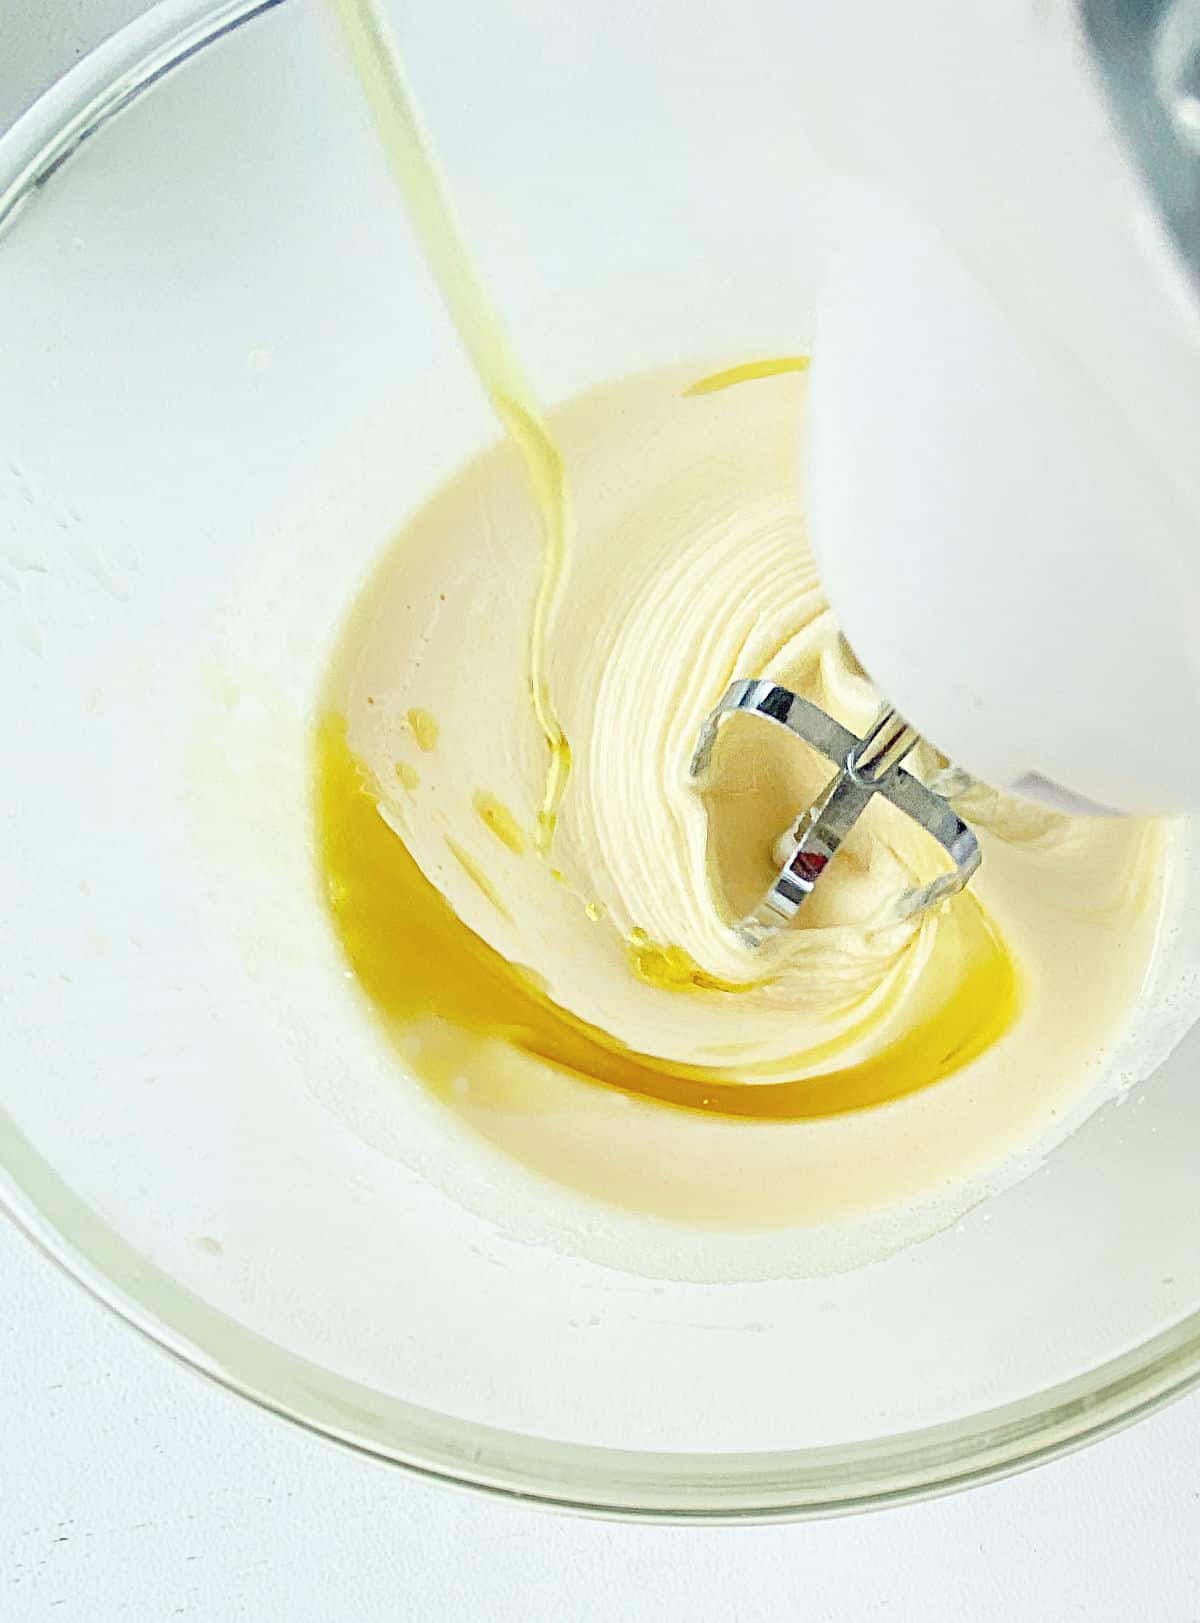 Adding oil to cake batter in glass bowl while beating